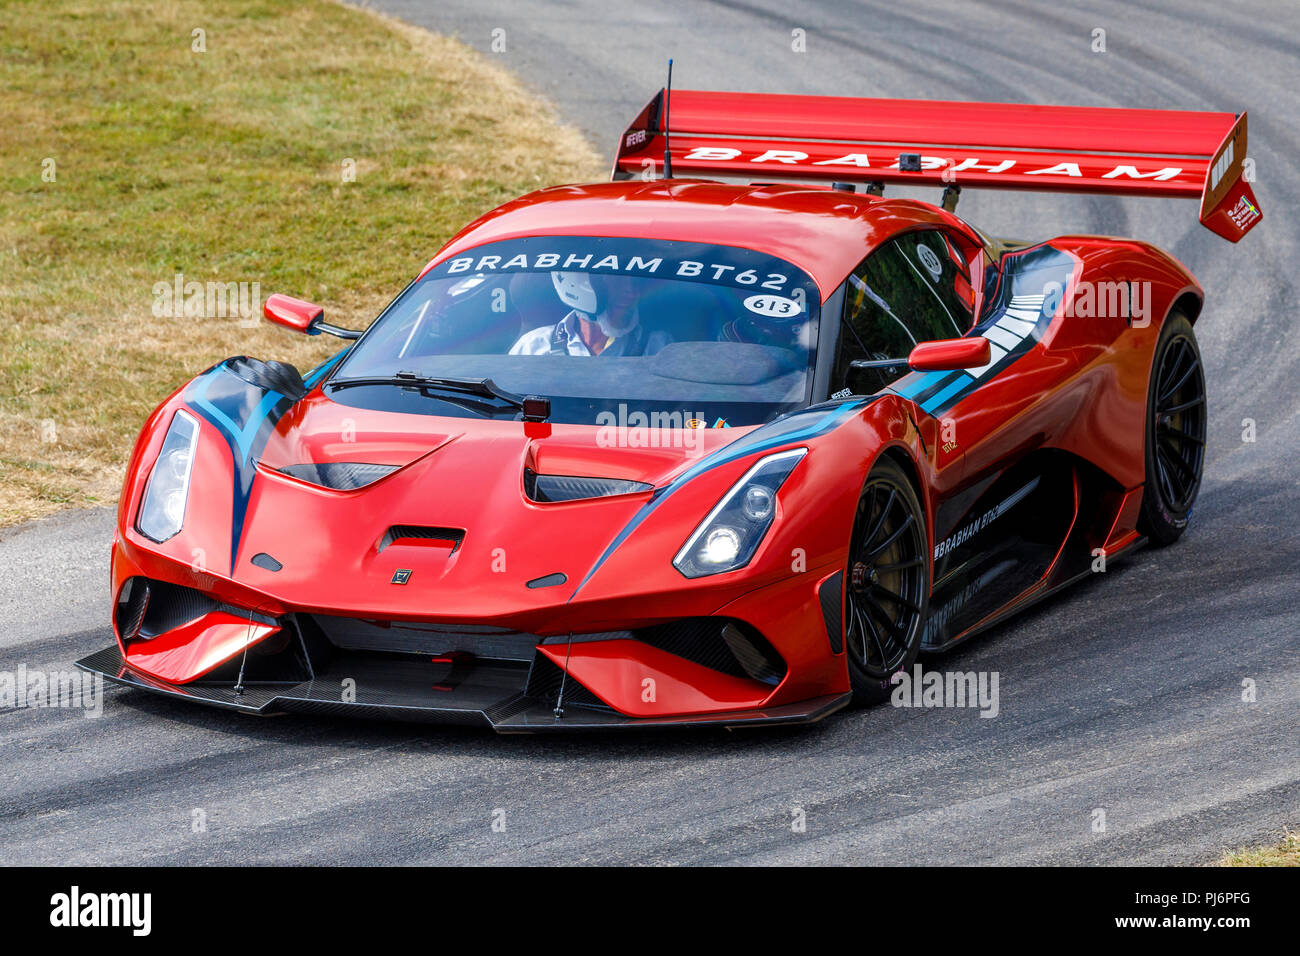 Brabham bt62 hi-res stock photography and images - Alamy